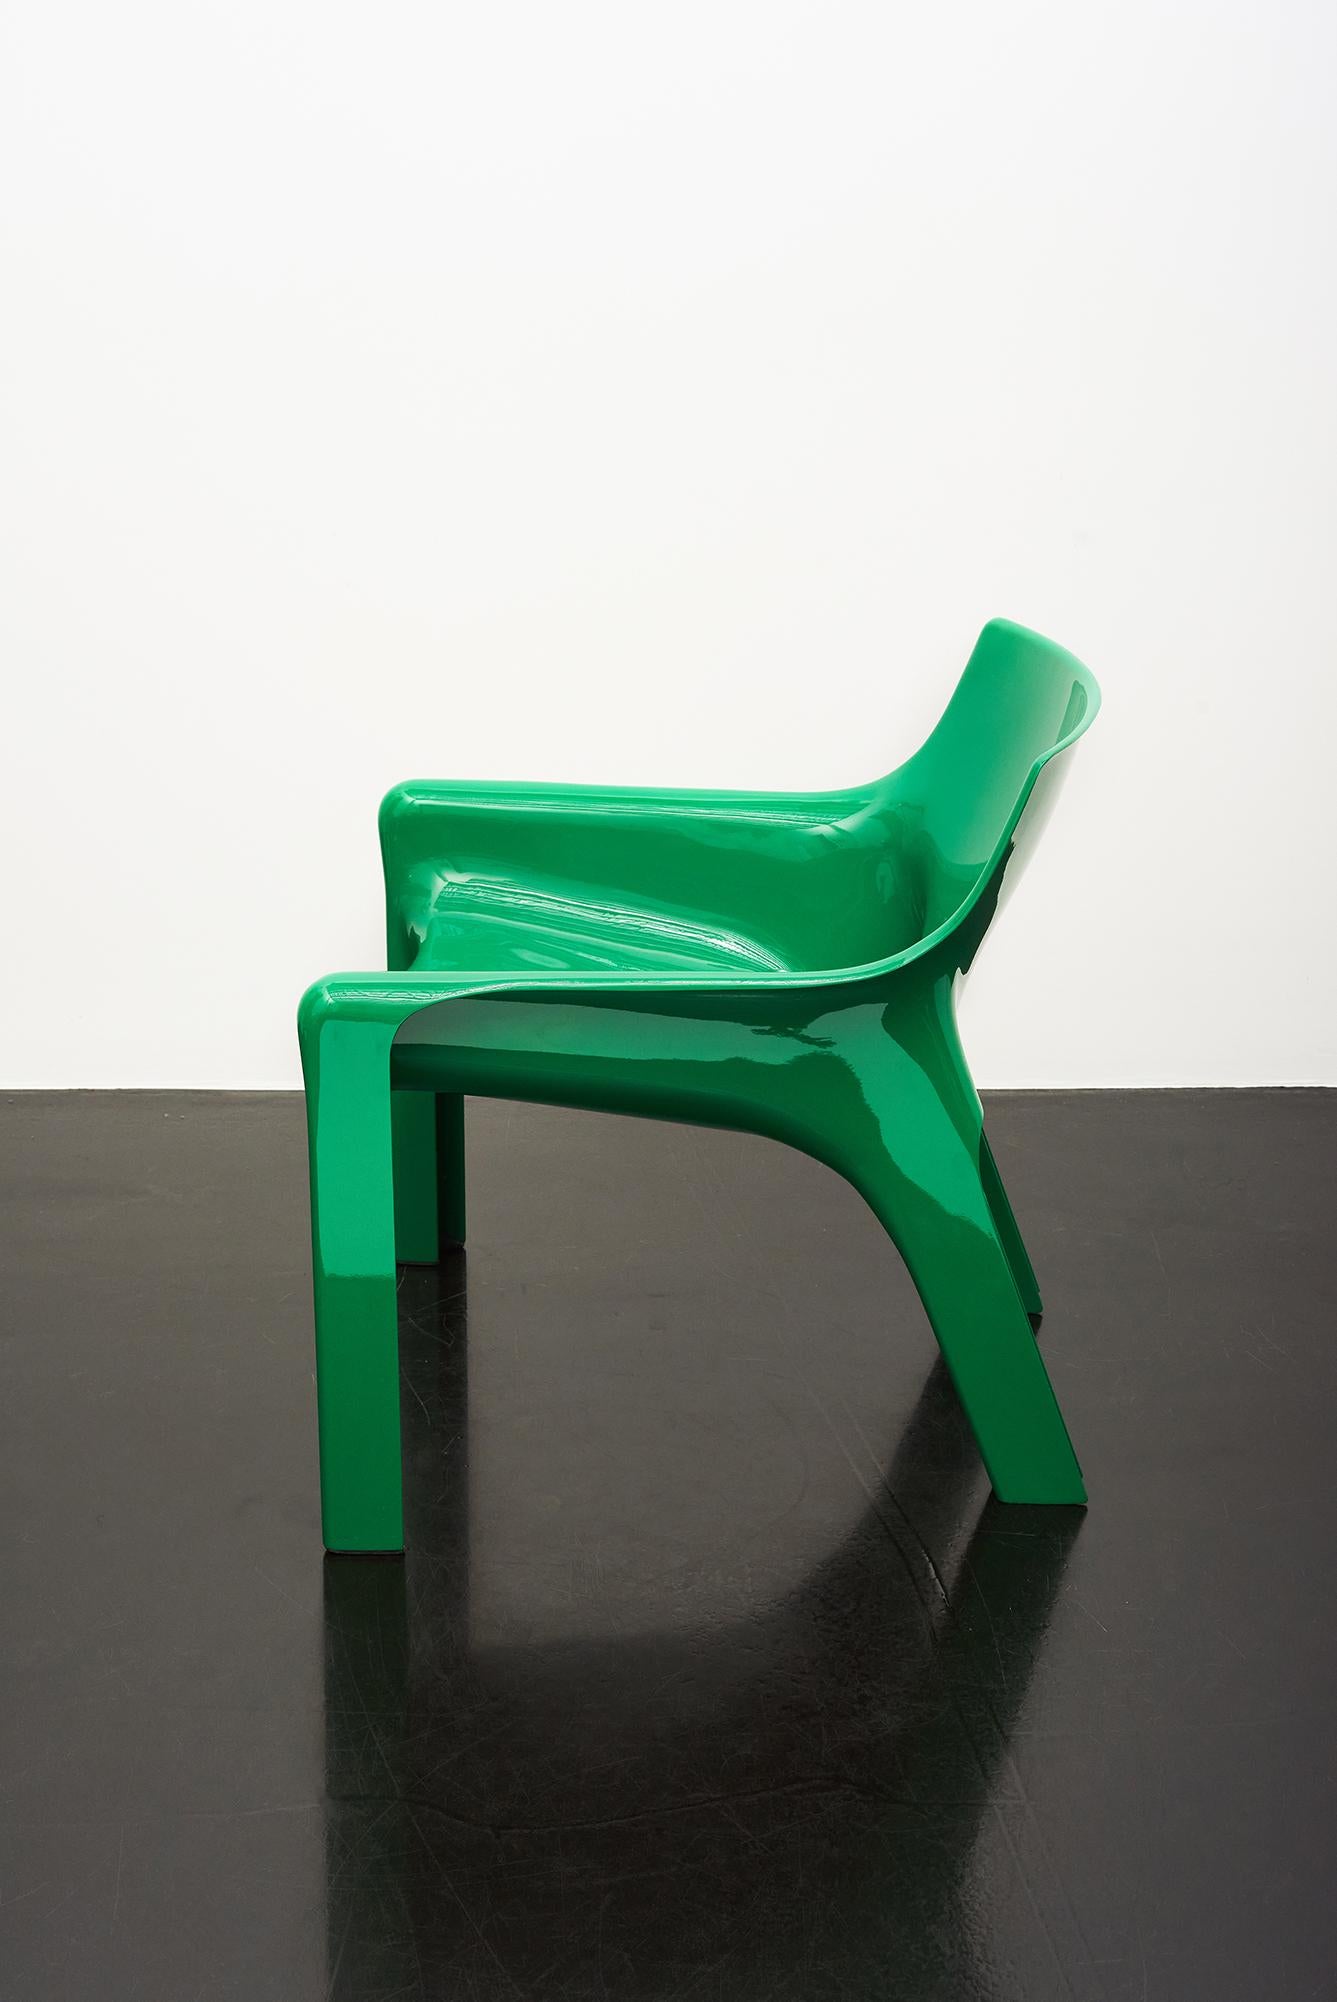 Space Age Vicario armchair designed by Vico Magistretti for Artemide, Italy 1970s. For Sale